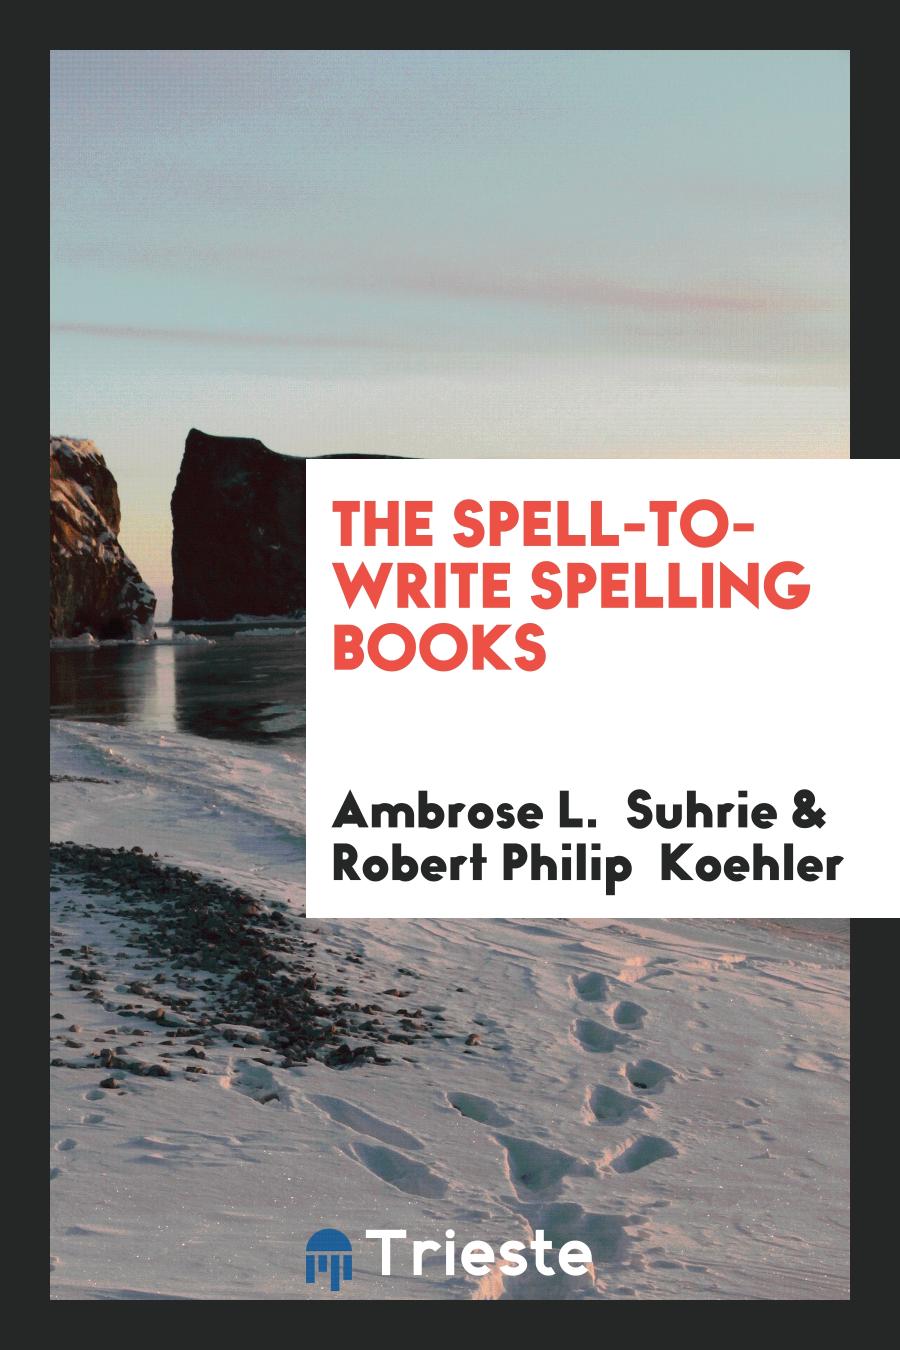 The Spell-to-Write Spelling Books